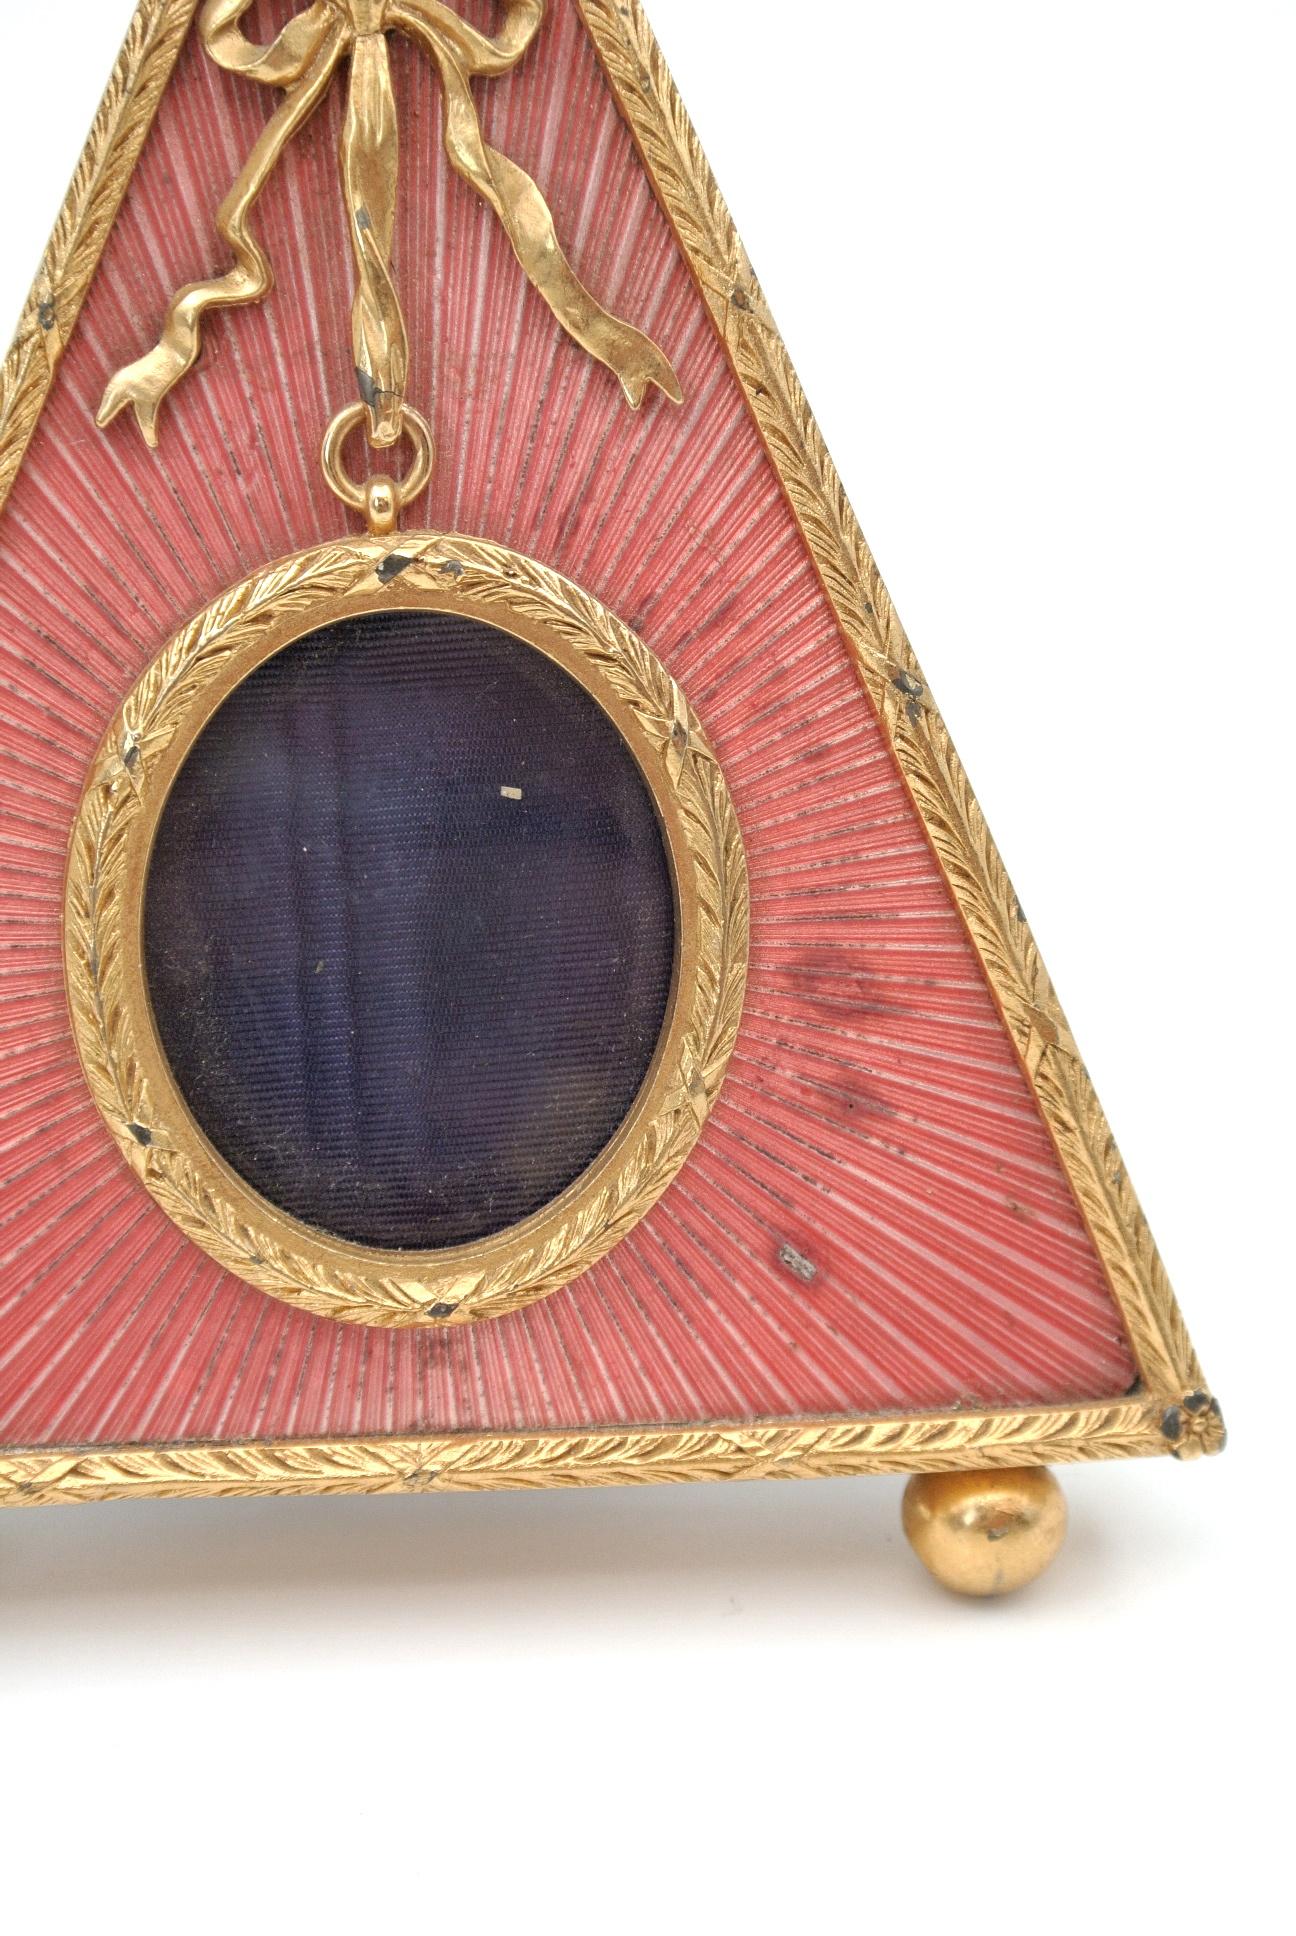 Napoleon III Pyramid-Shaped Photo Frame in Gilded Bronze and Enamel